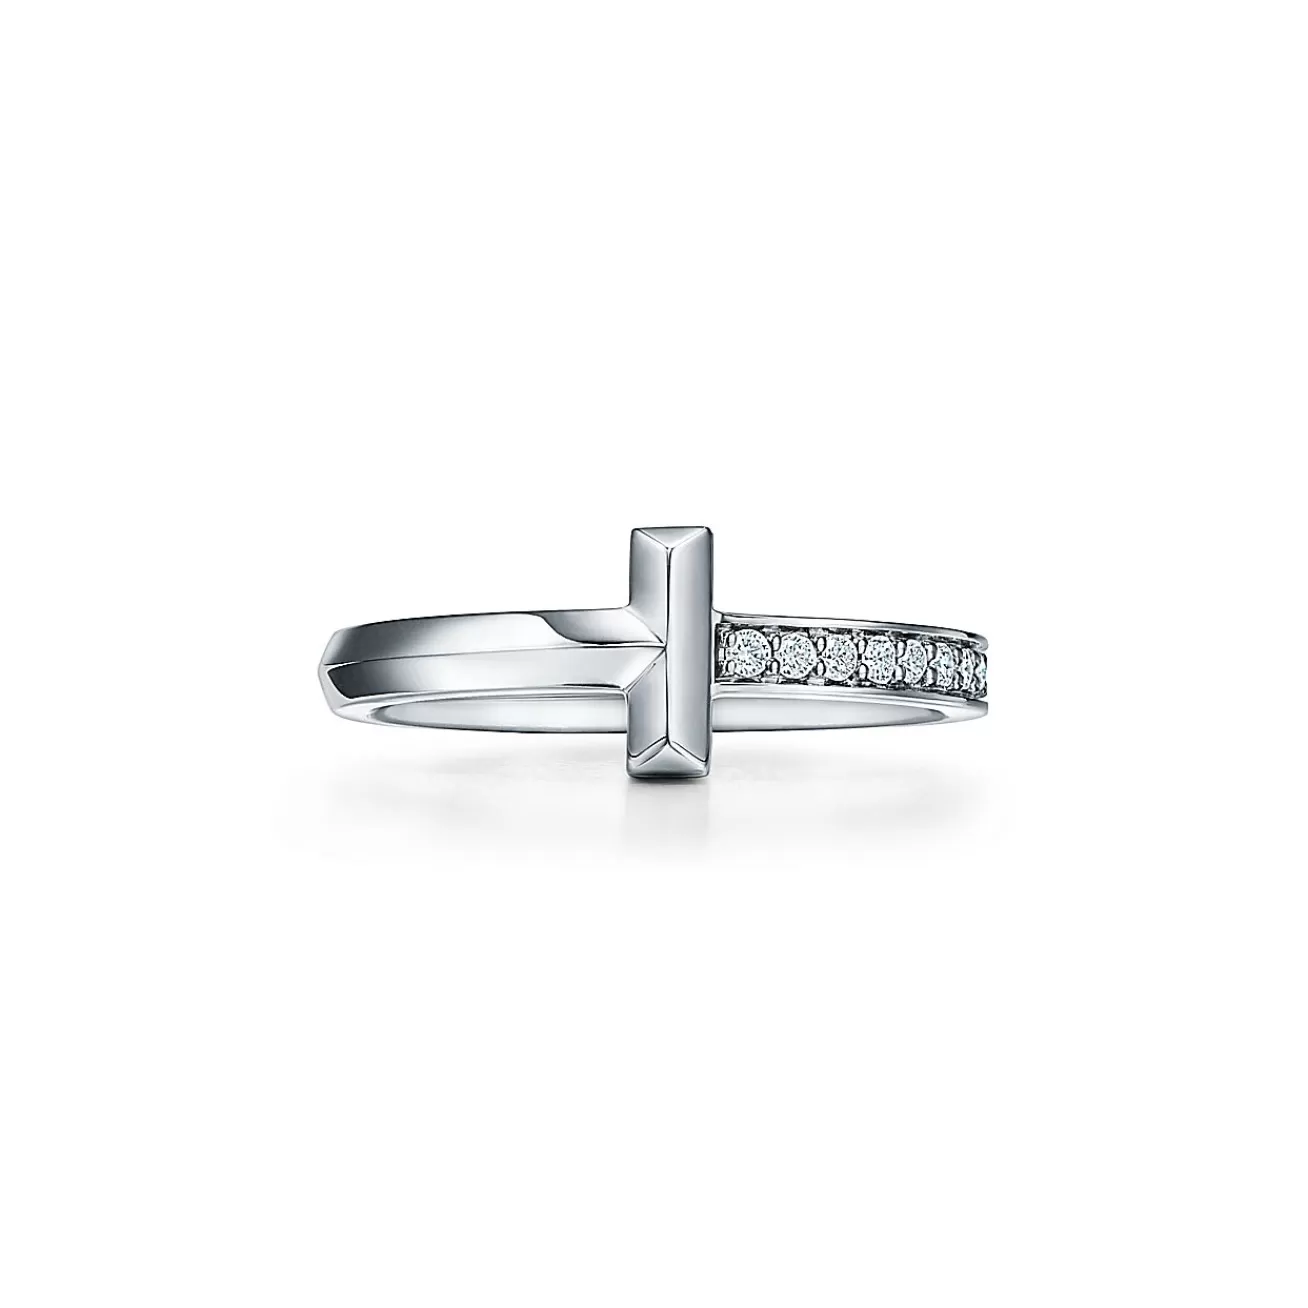 Tiffany & Co. Tiffany T T1 Ring in White Gold with Diamonds, 2.5 mm Wide | ^ Rings | Men's Jewelry